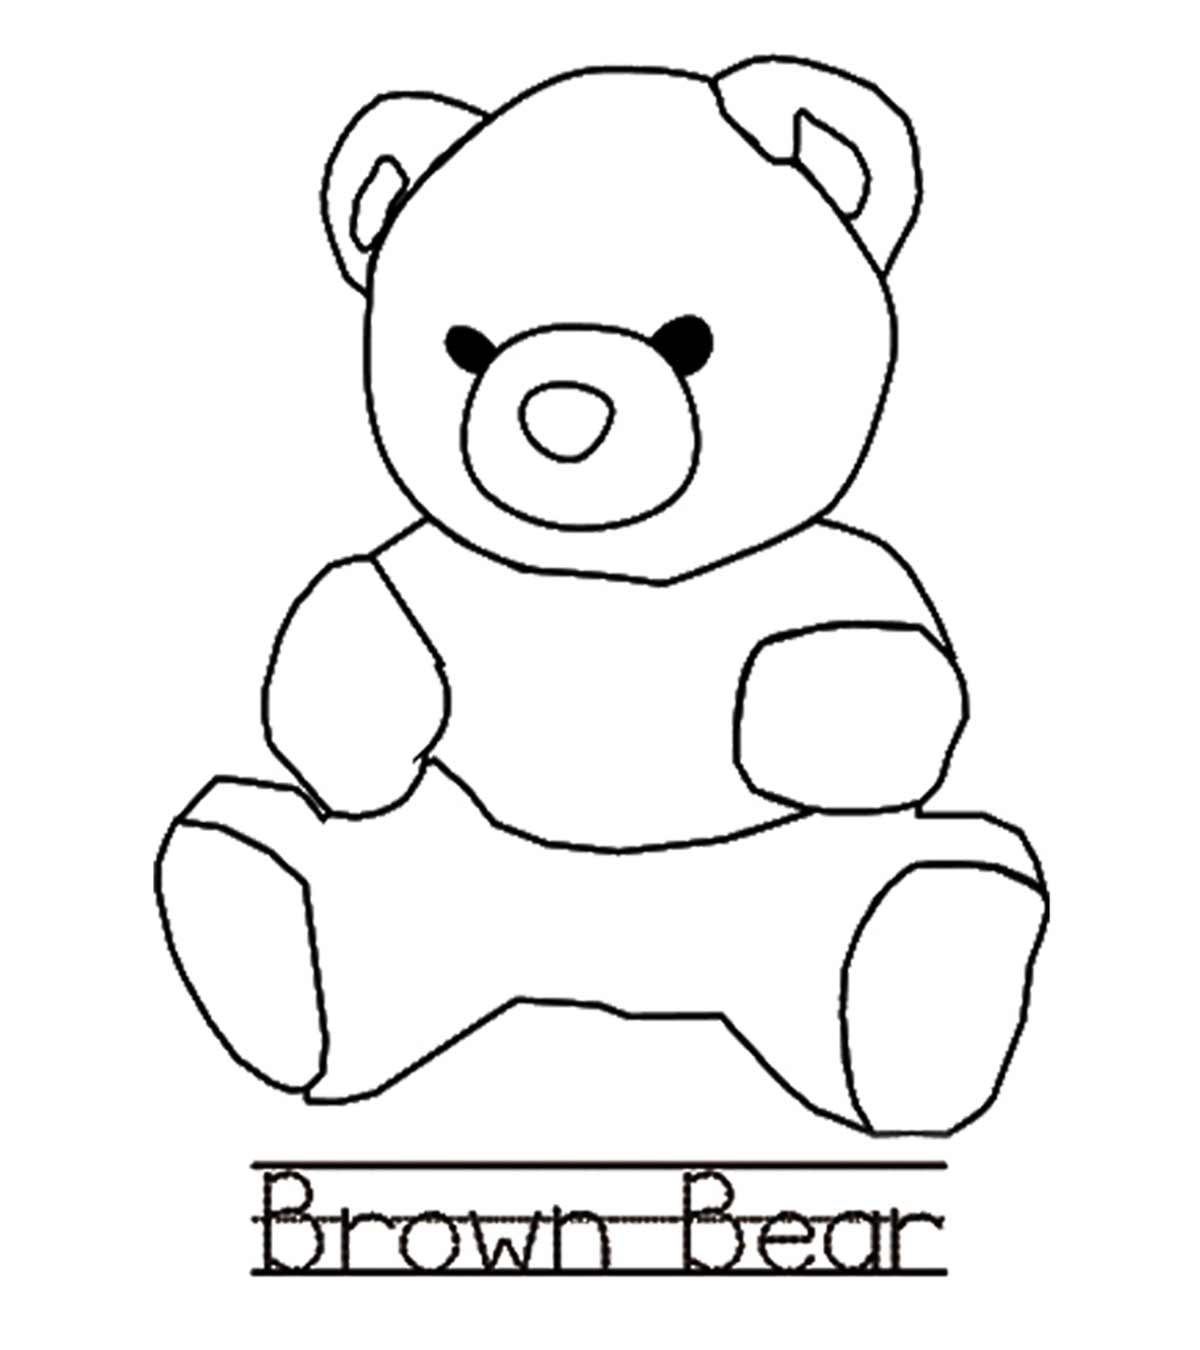 Top 10 Letter ‘B’ Coloring Pages Your Toddler Will Love To Learn & Color_image